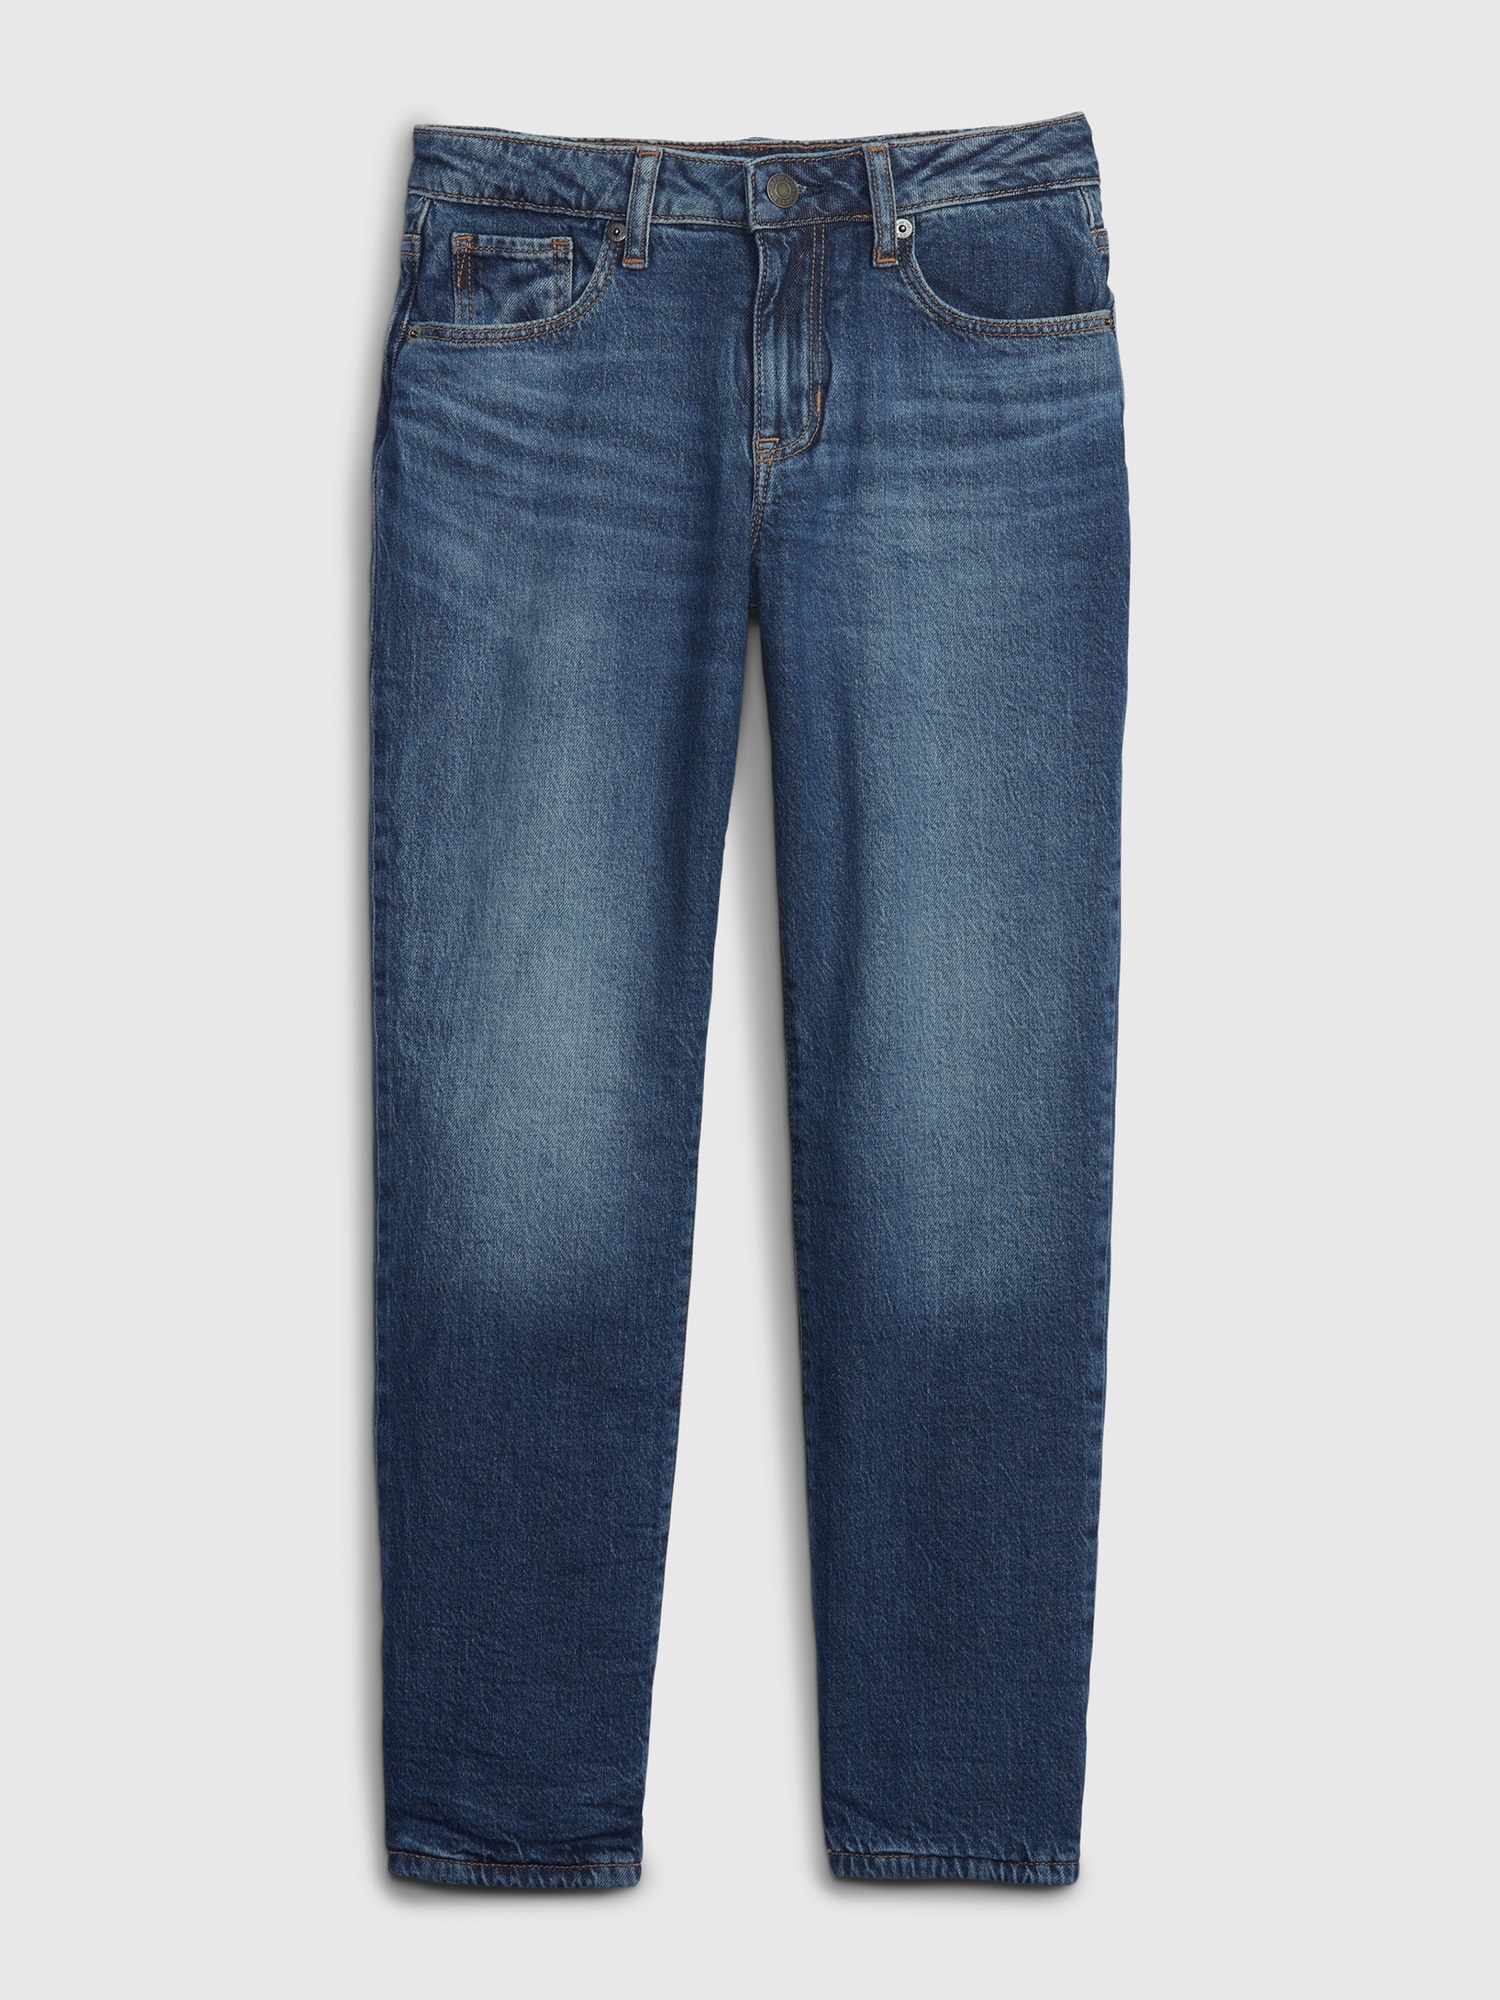 Winter Lined Jeans 